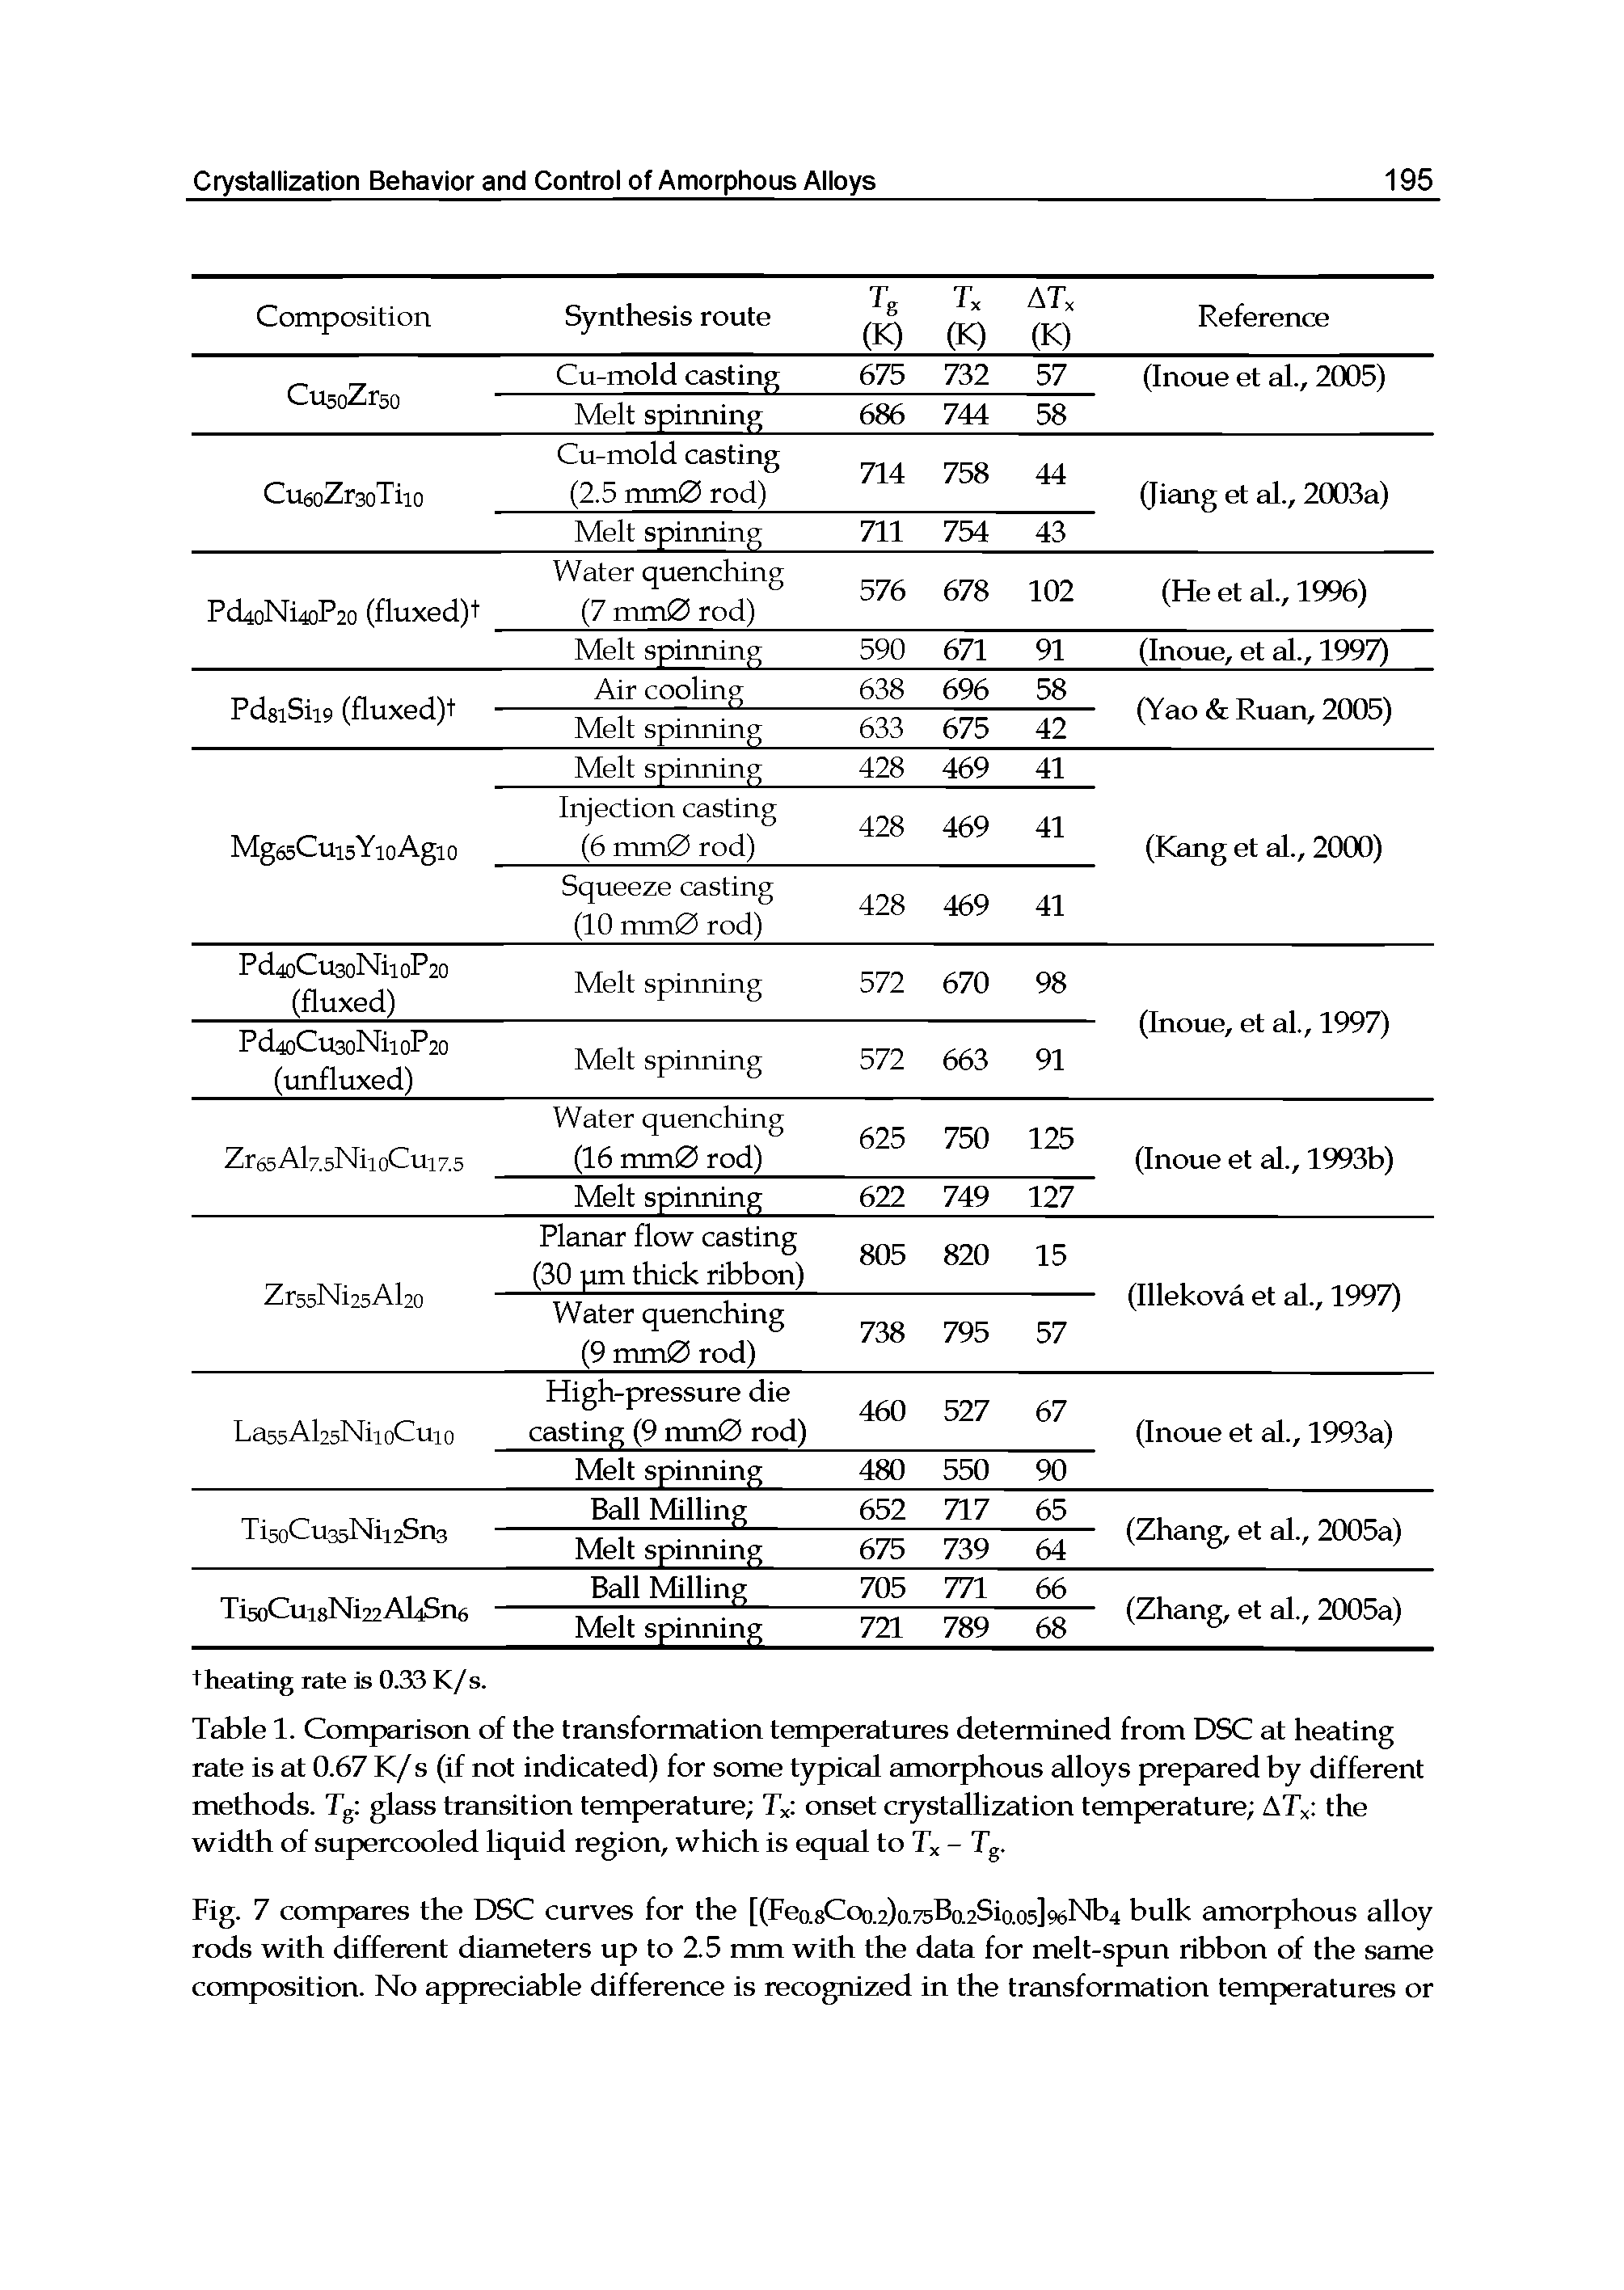 Table 1. Comparison of the transformation temperatures determined from DSC at heating rate is at 0.67 K/ s (if not indicated) for some typical amorphous alloys prepared by different methods. Tg glass transition temperature Txi onset crystallization temperature AT the width of supercooled liquid region, which is equal to Tx - Tg.